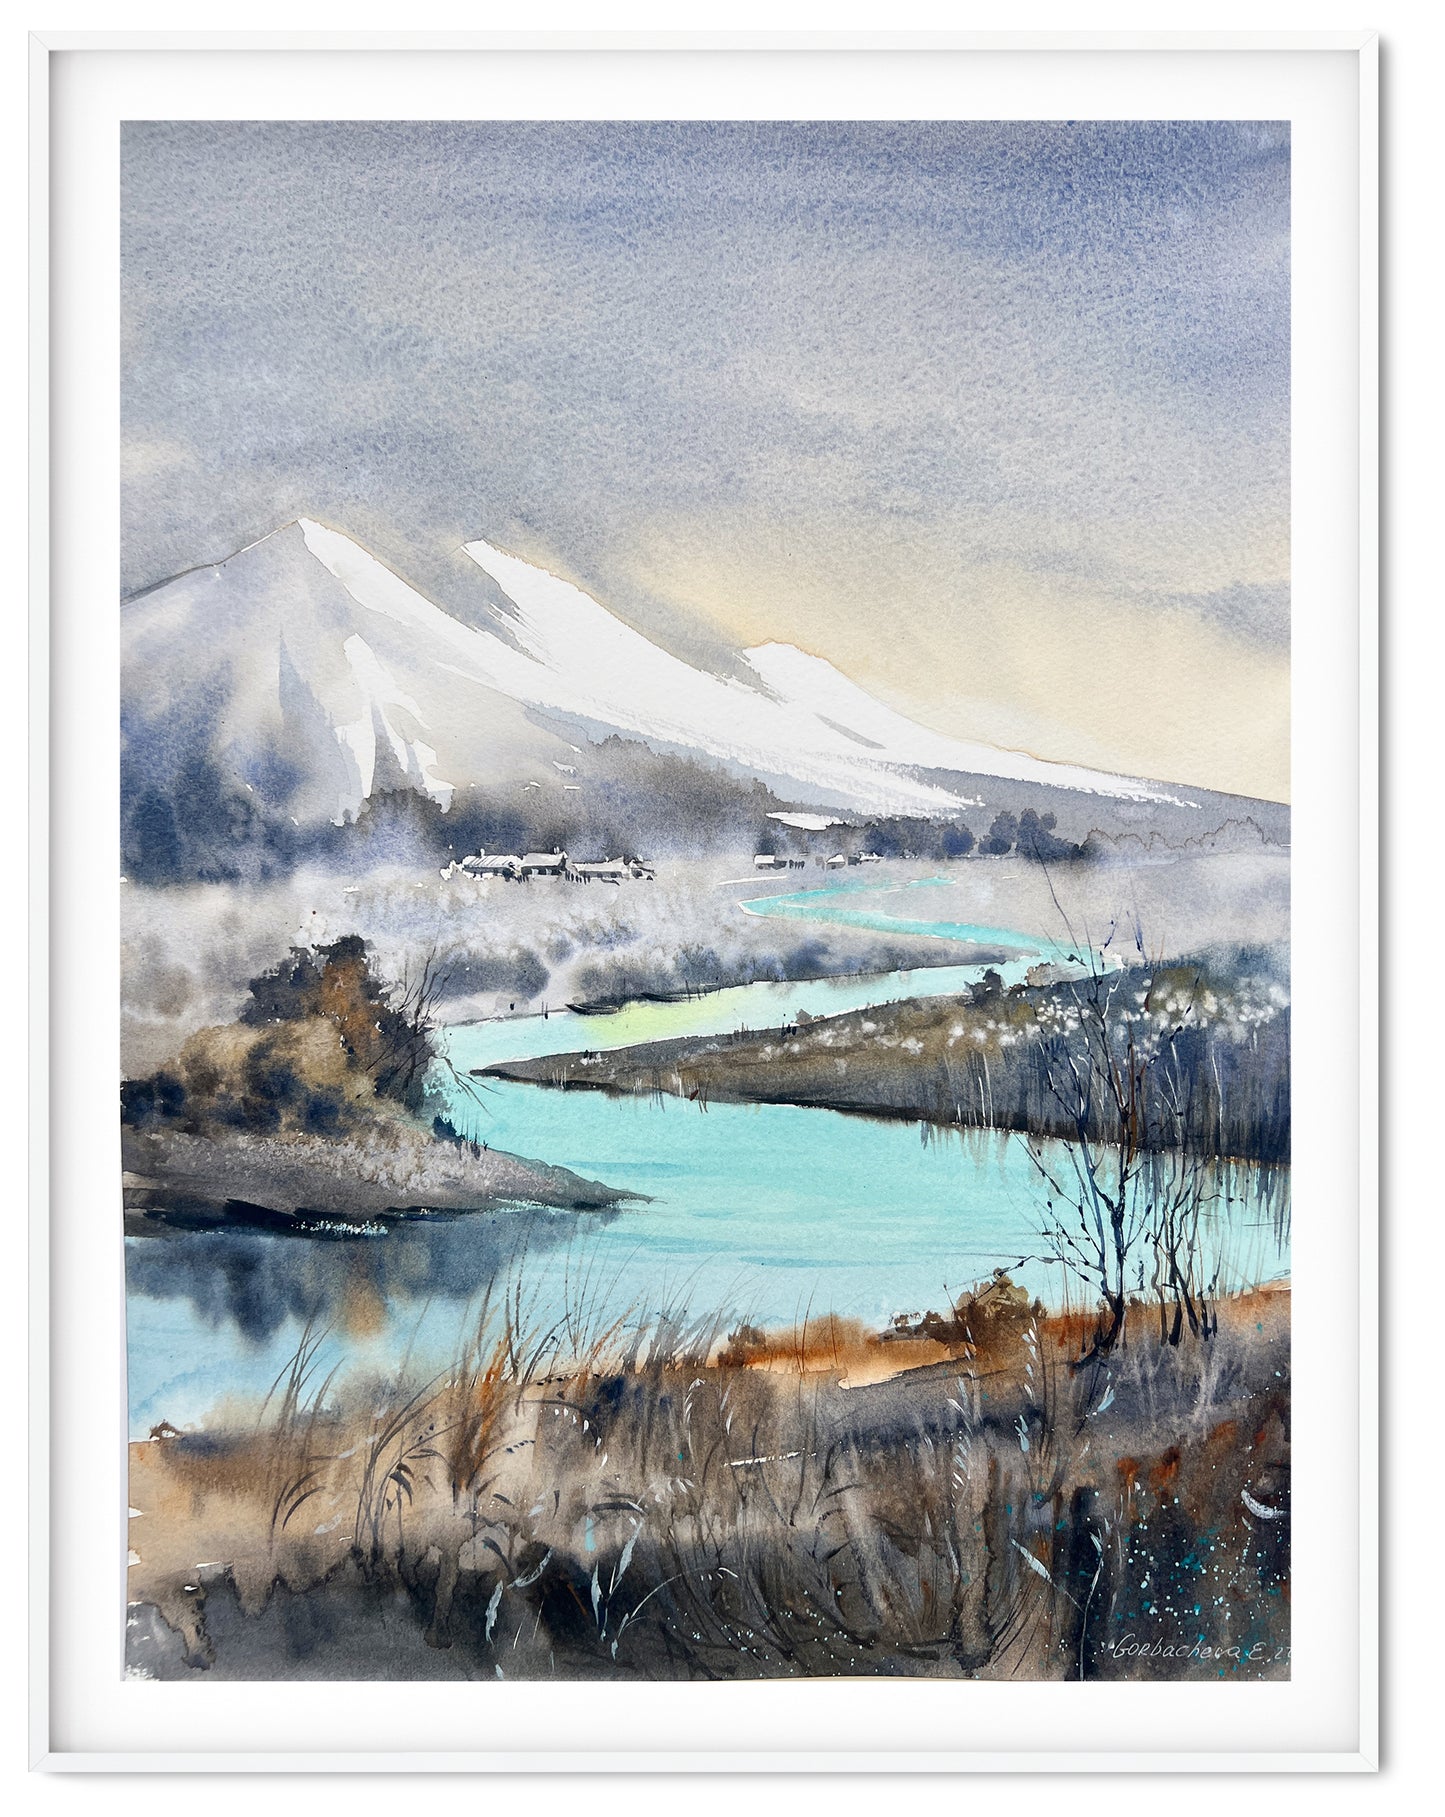 Misty Mountains, Original Watercolor Painting, Foggy Mountain River, Landscape Wall Art, Unique Gift